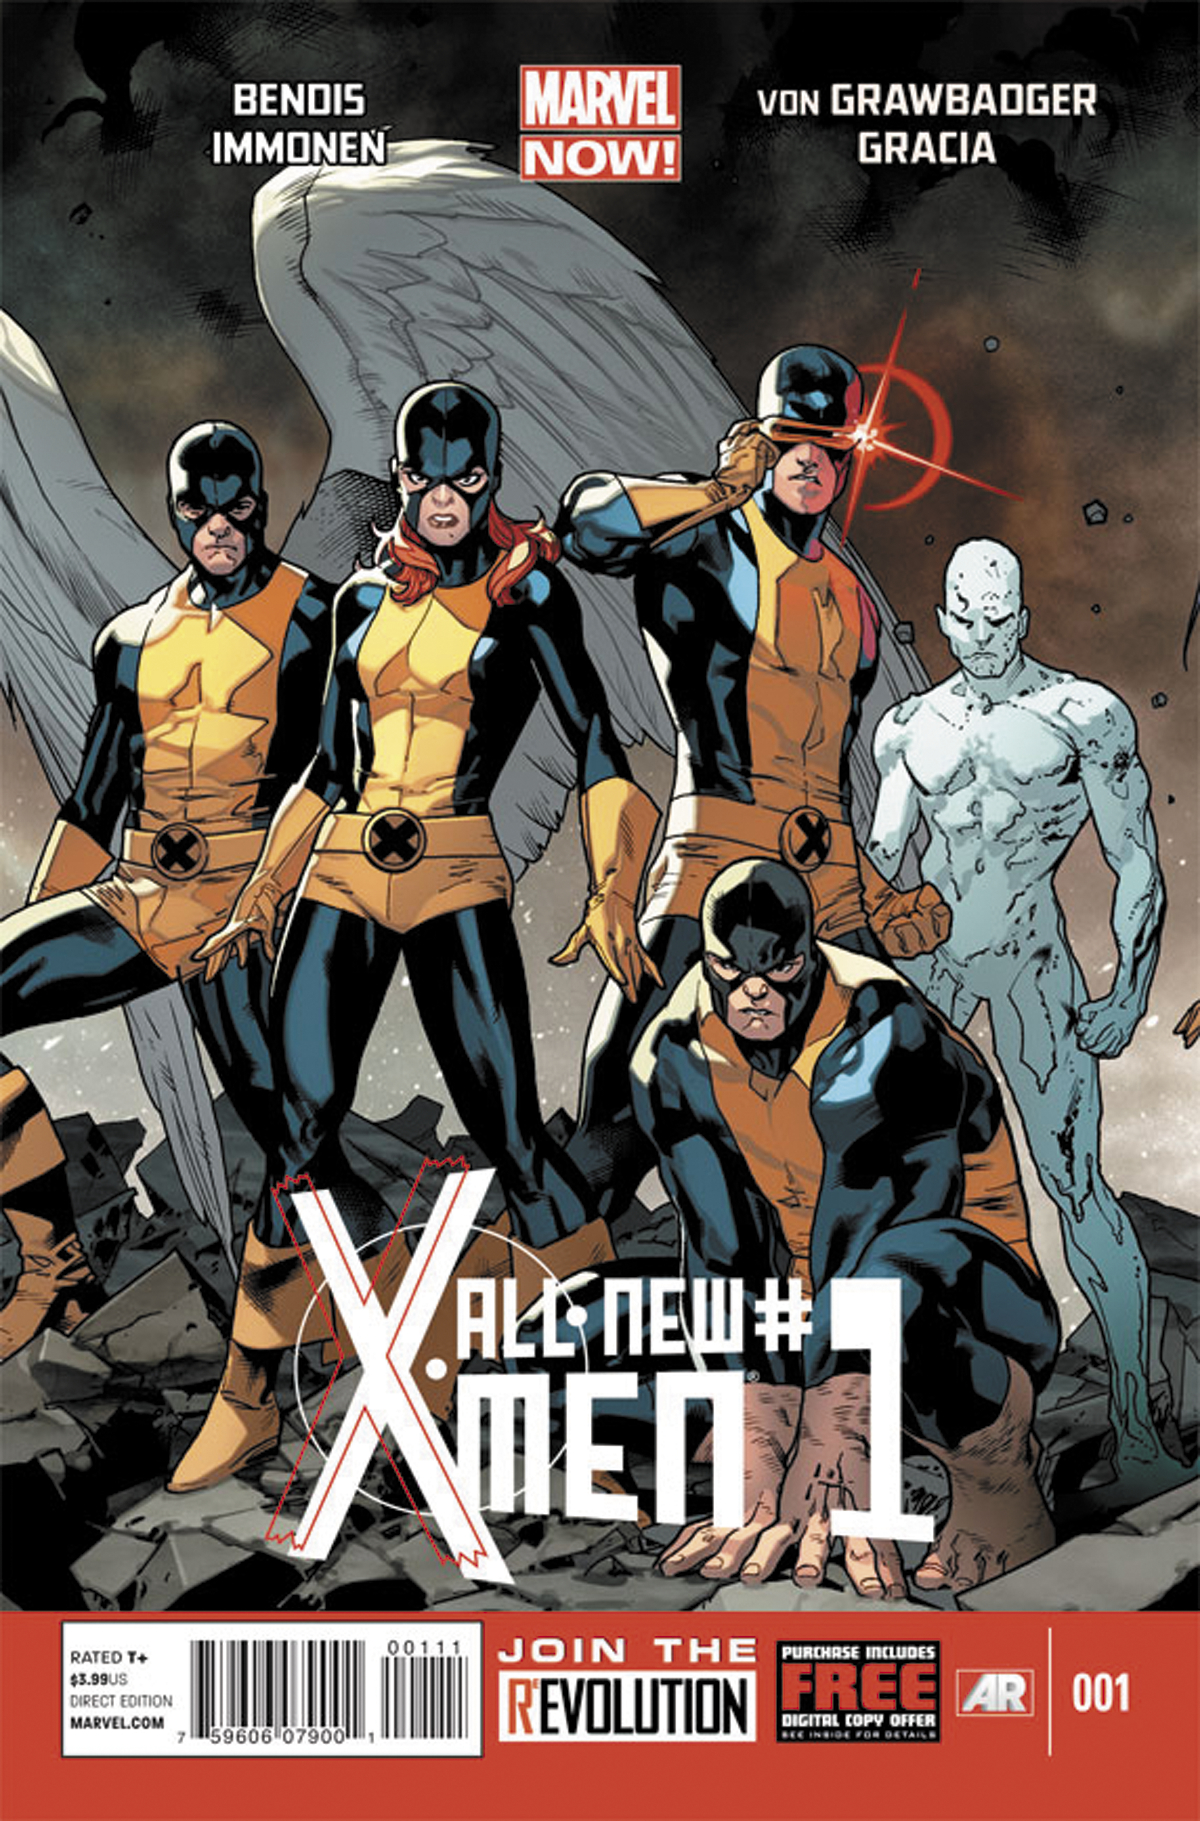 ALL NEW X-MEN #1 NOW